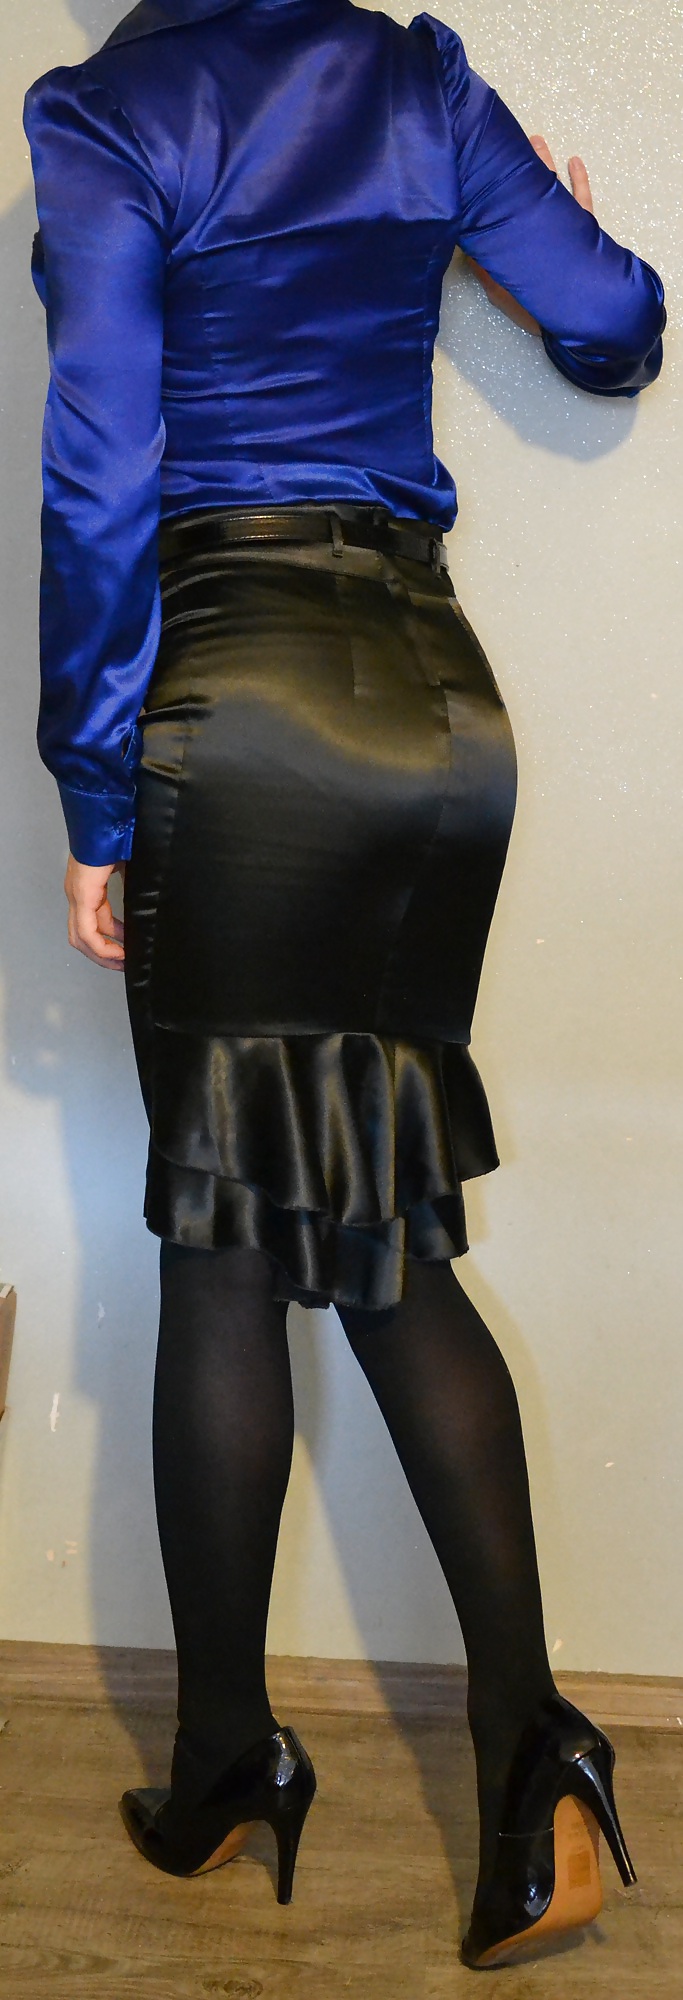 Dressed for work in my silky skirt, black tights and heels #23512112